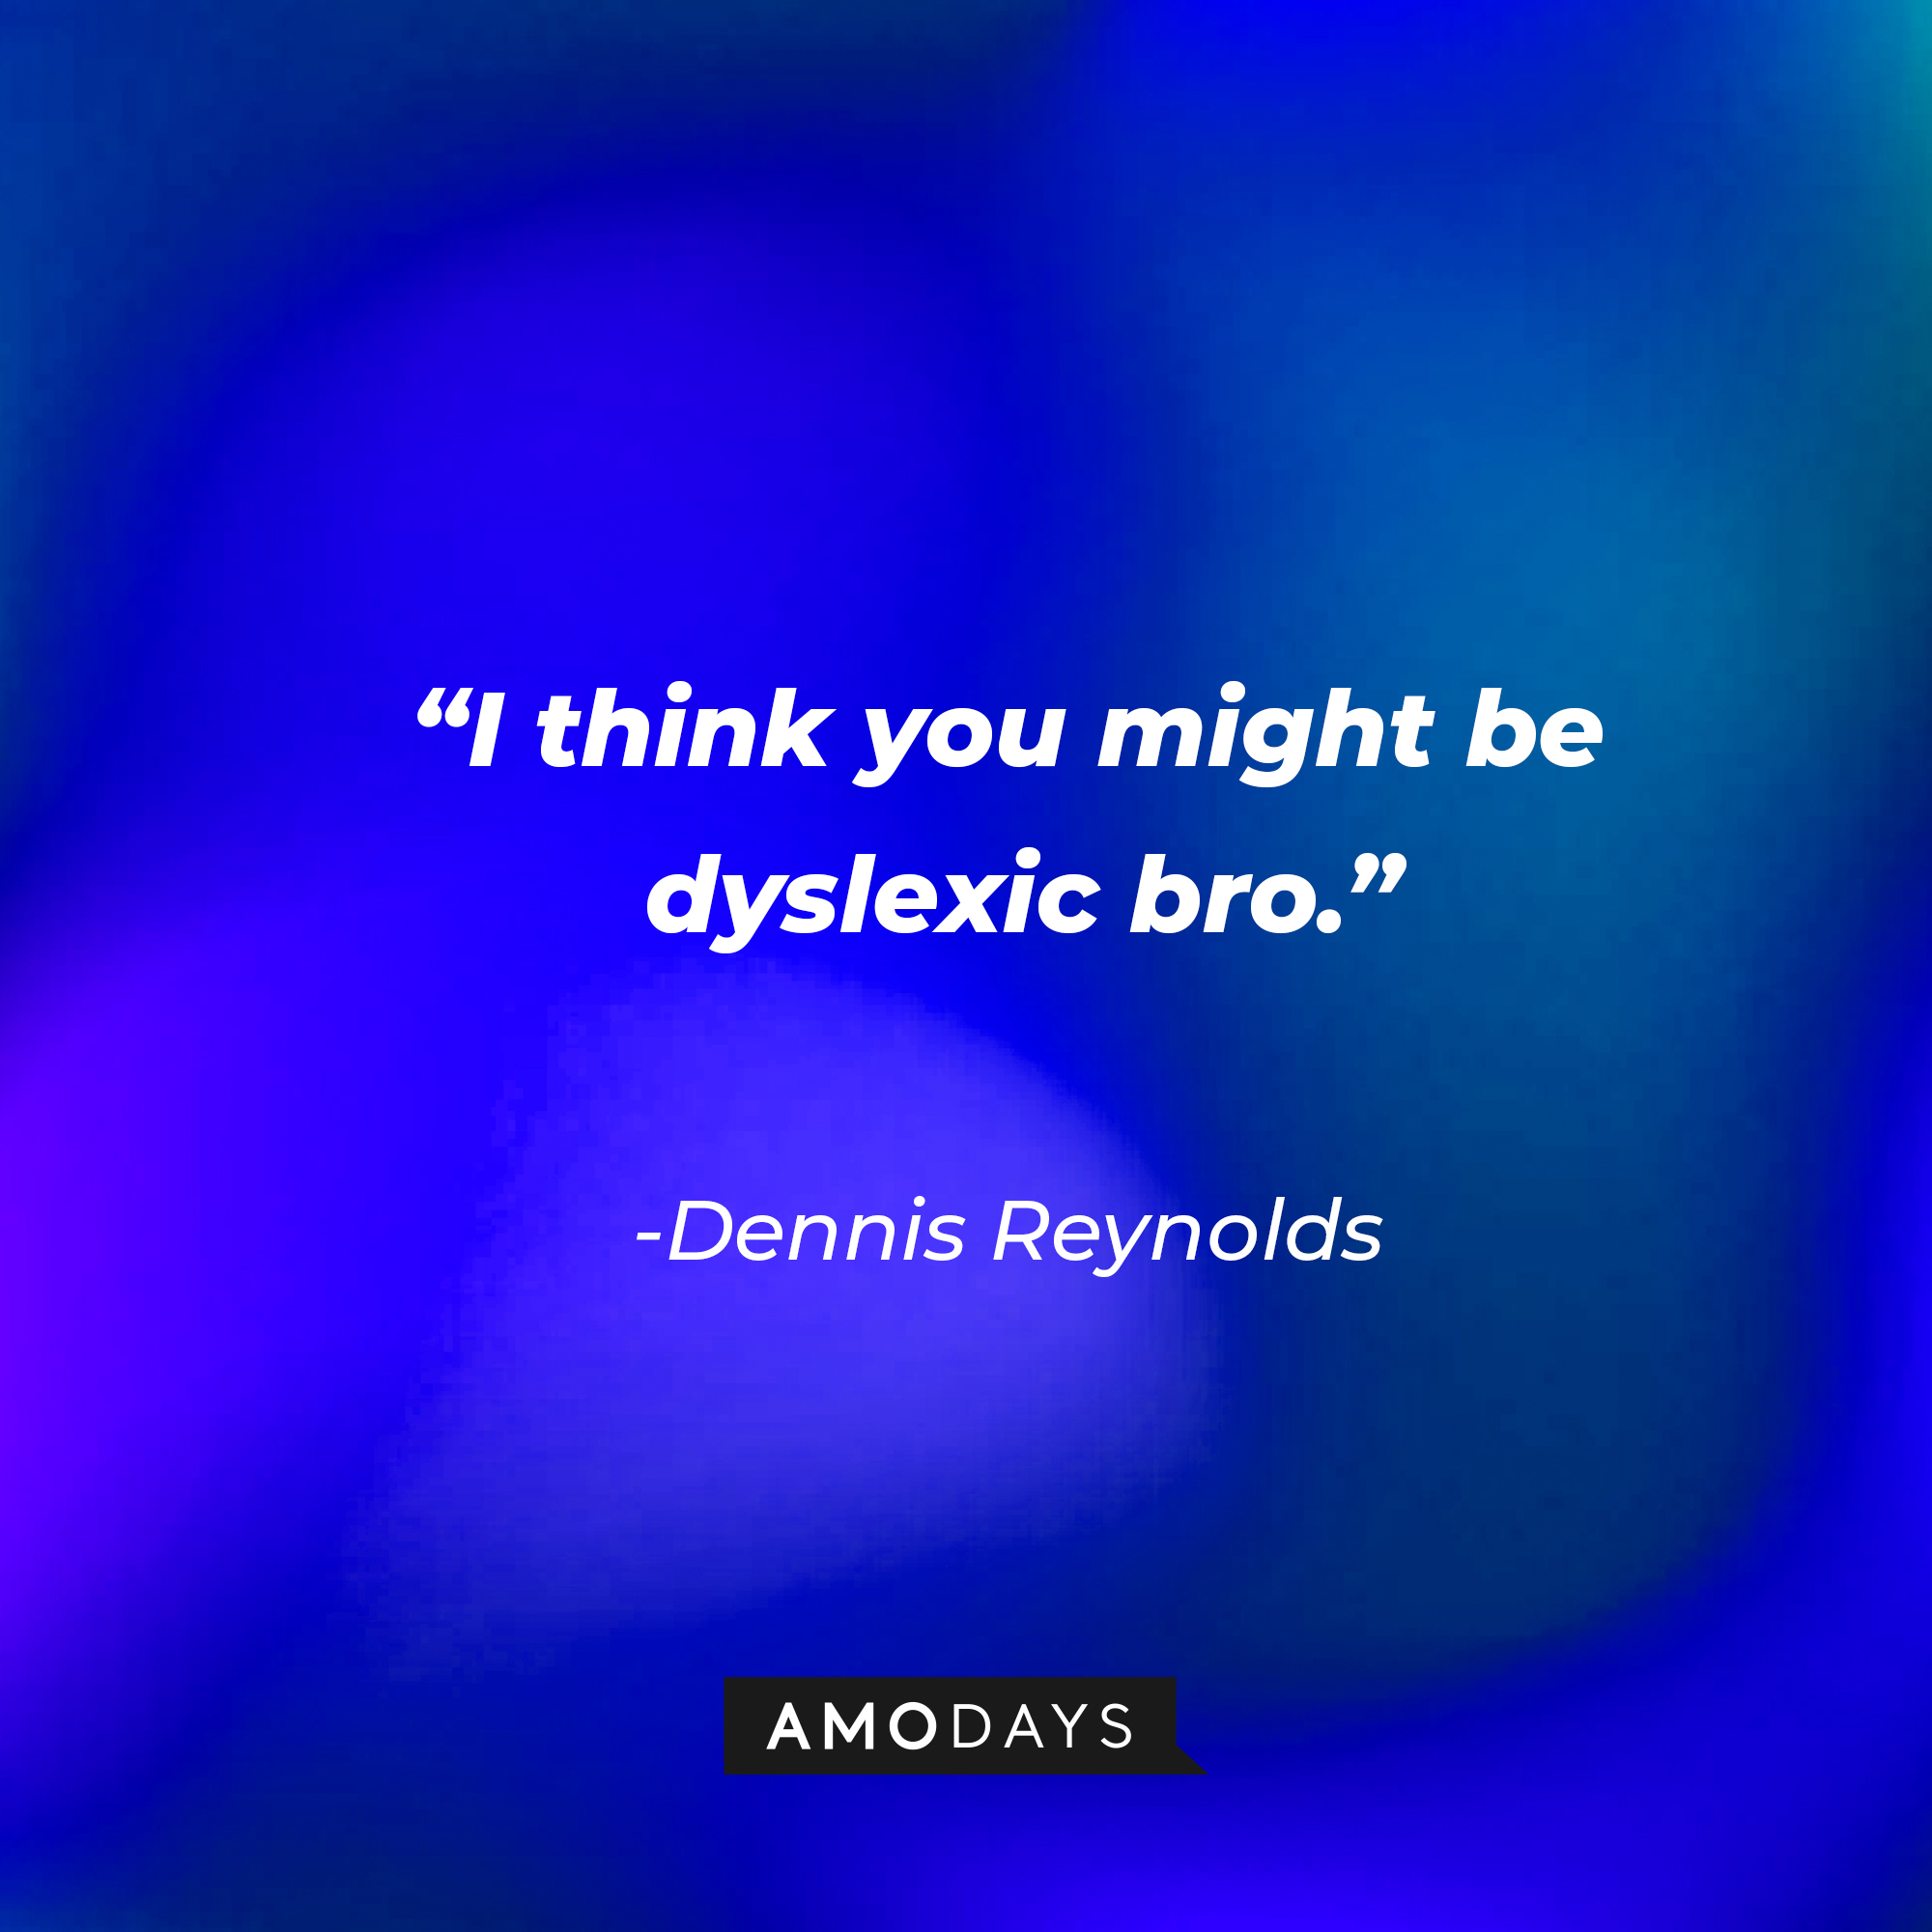 Dennis Reynolds’ quote:  “I think you might be dyslexic bro.” | Source: AmoDays